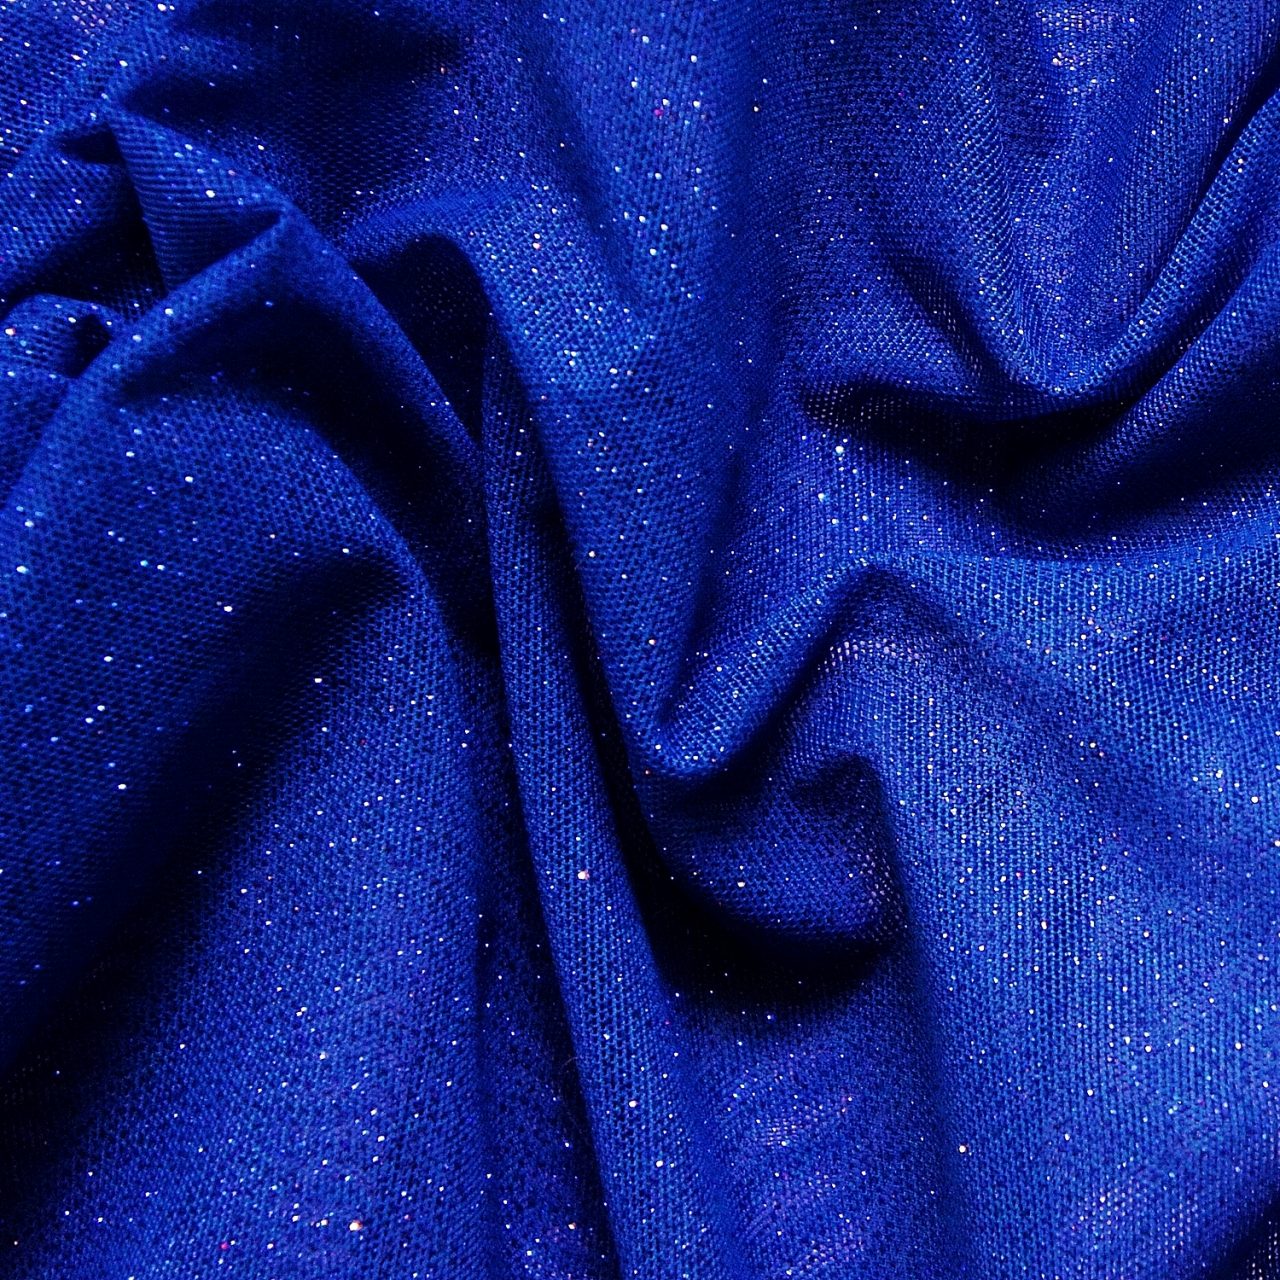 Royal Blue Glitter Tulle Fabric - by The Yard